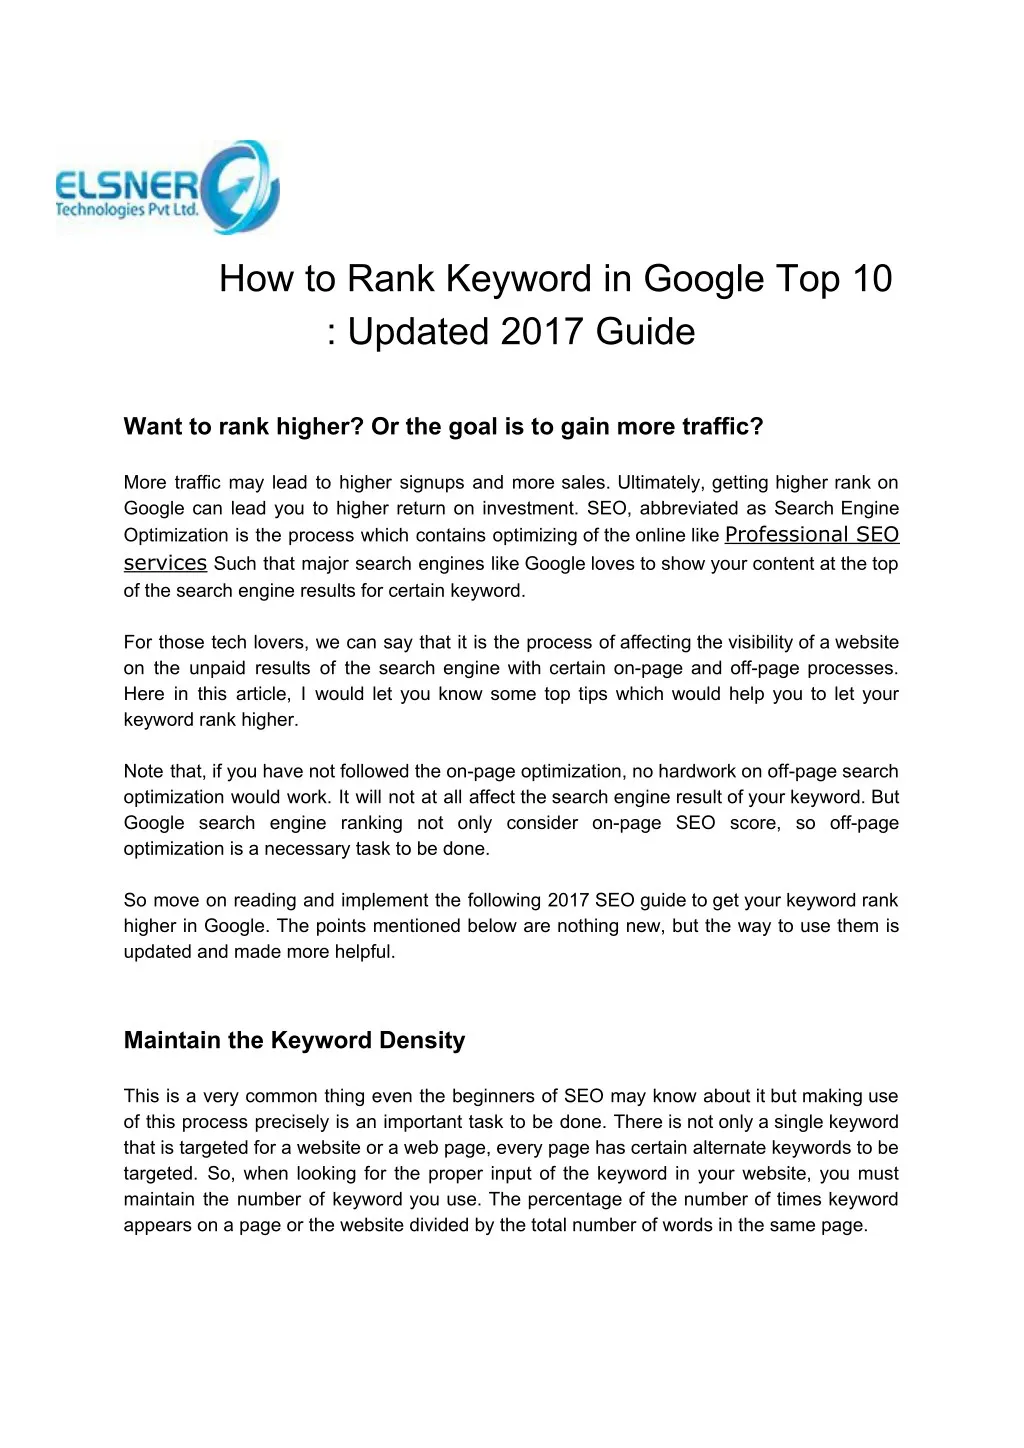 how to rank keyword in google top 10 updated 2017